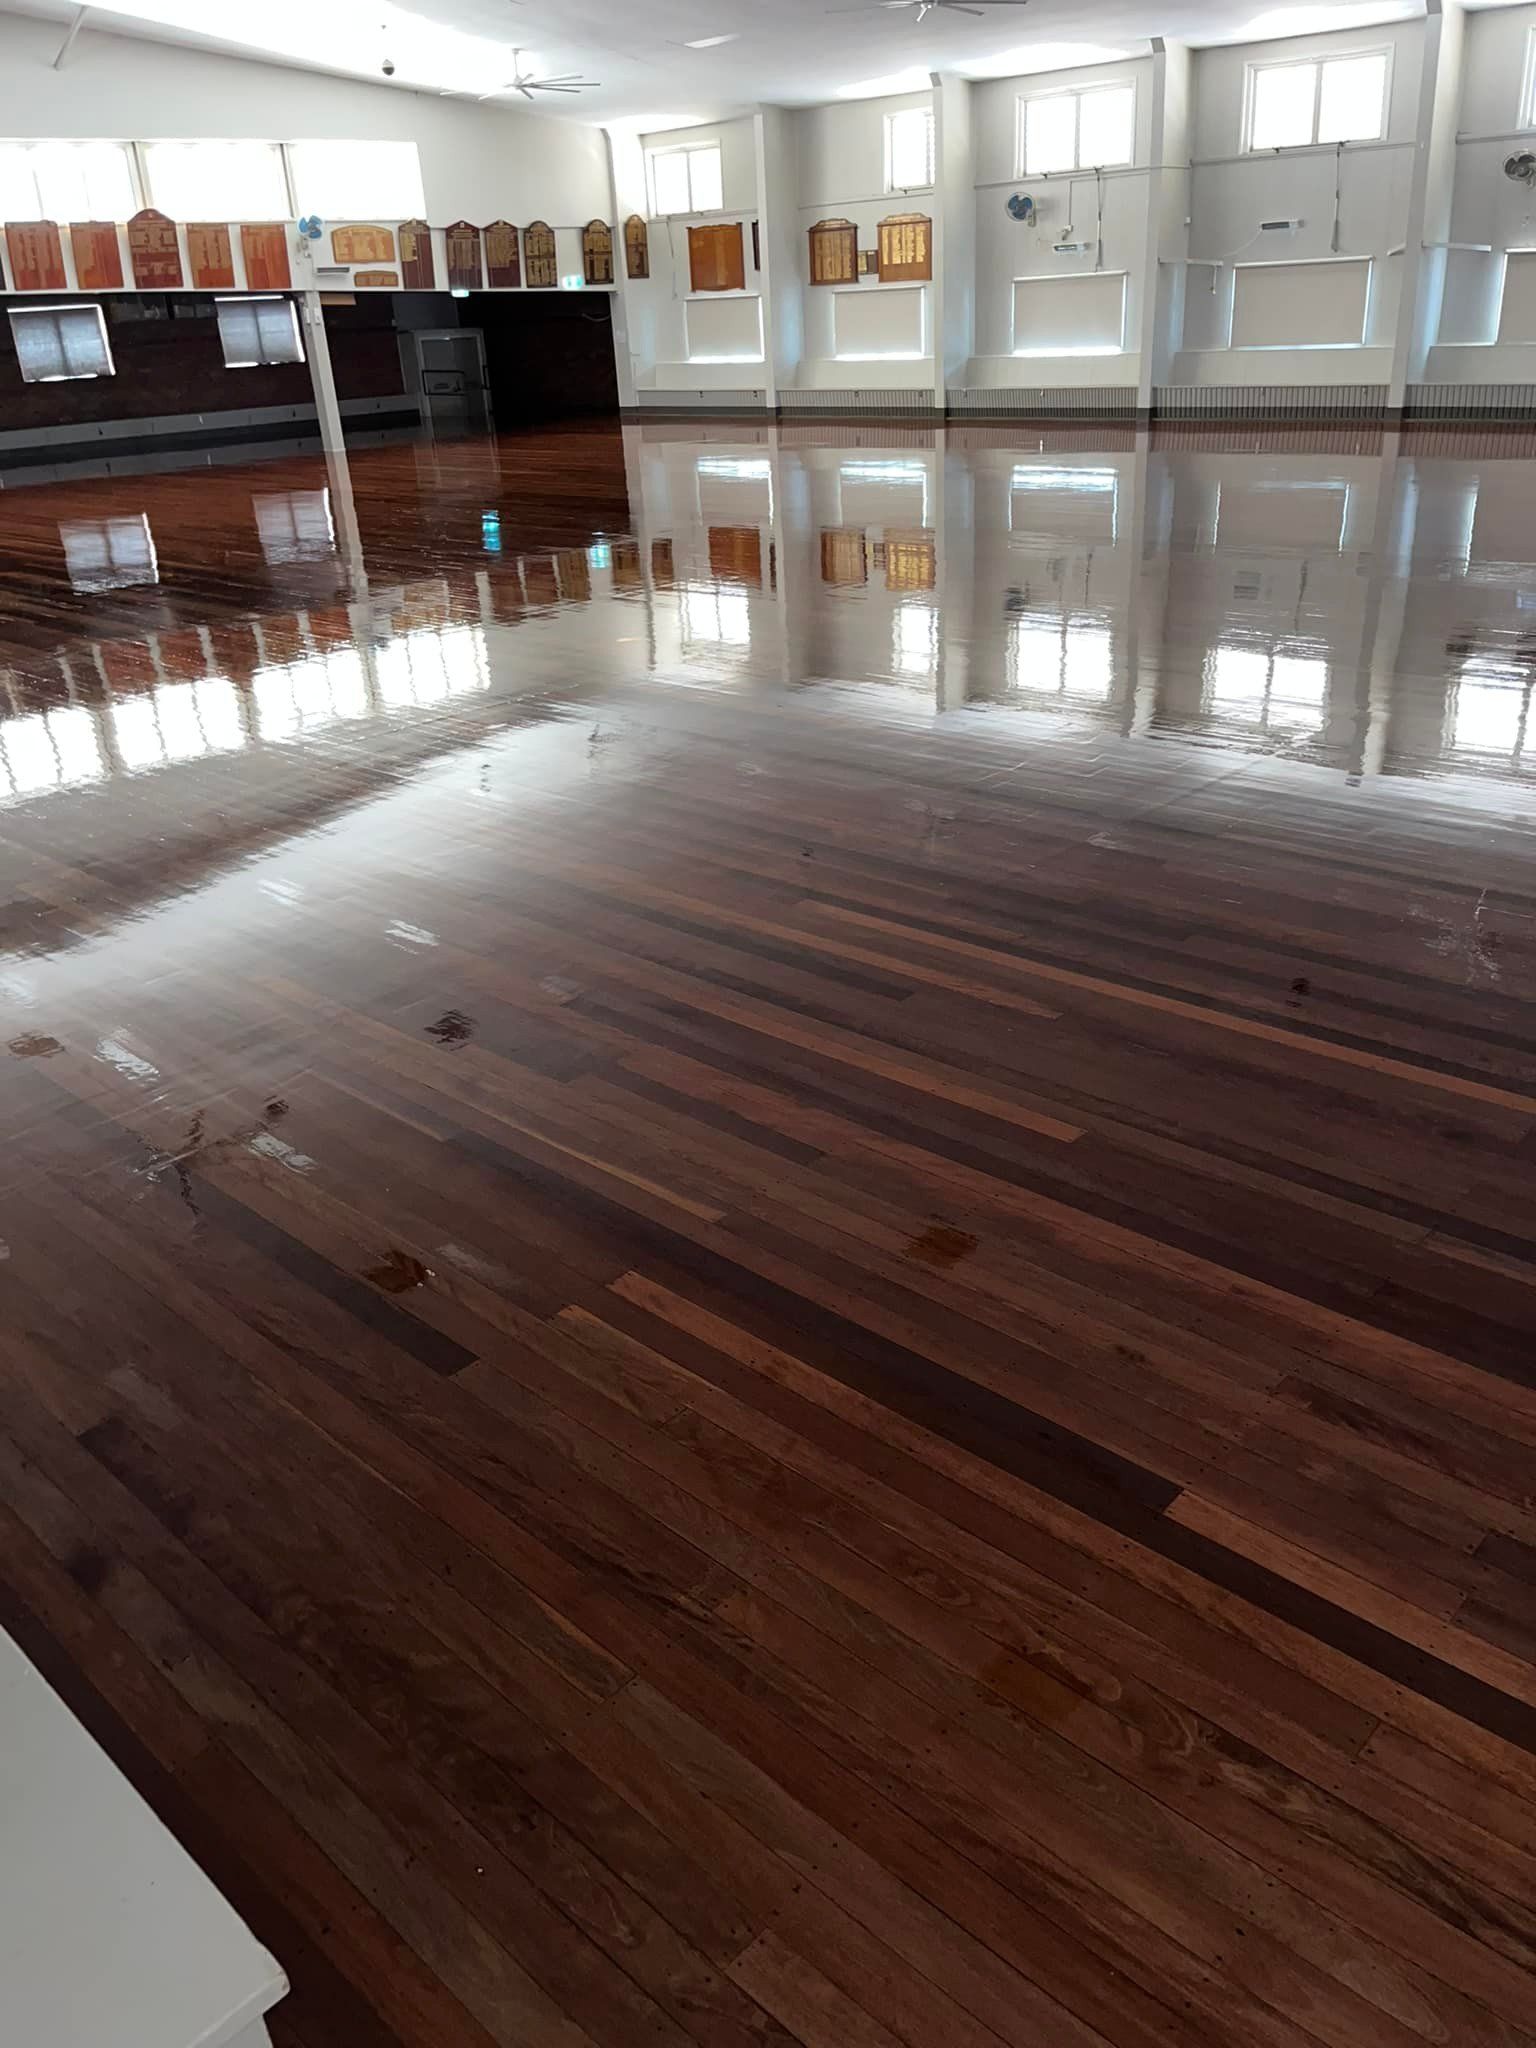 Community Hall With Polished Floors  - Flooring Experts in Toowoomba, QLD